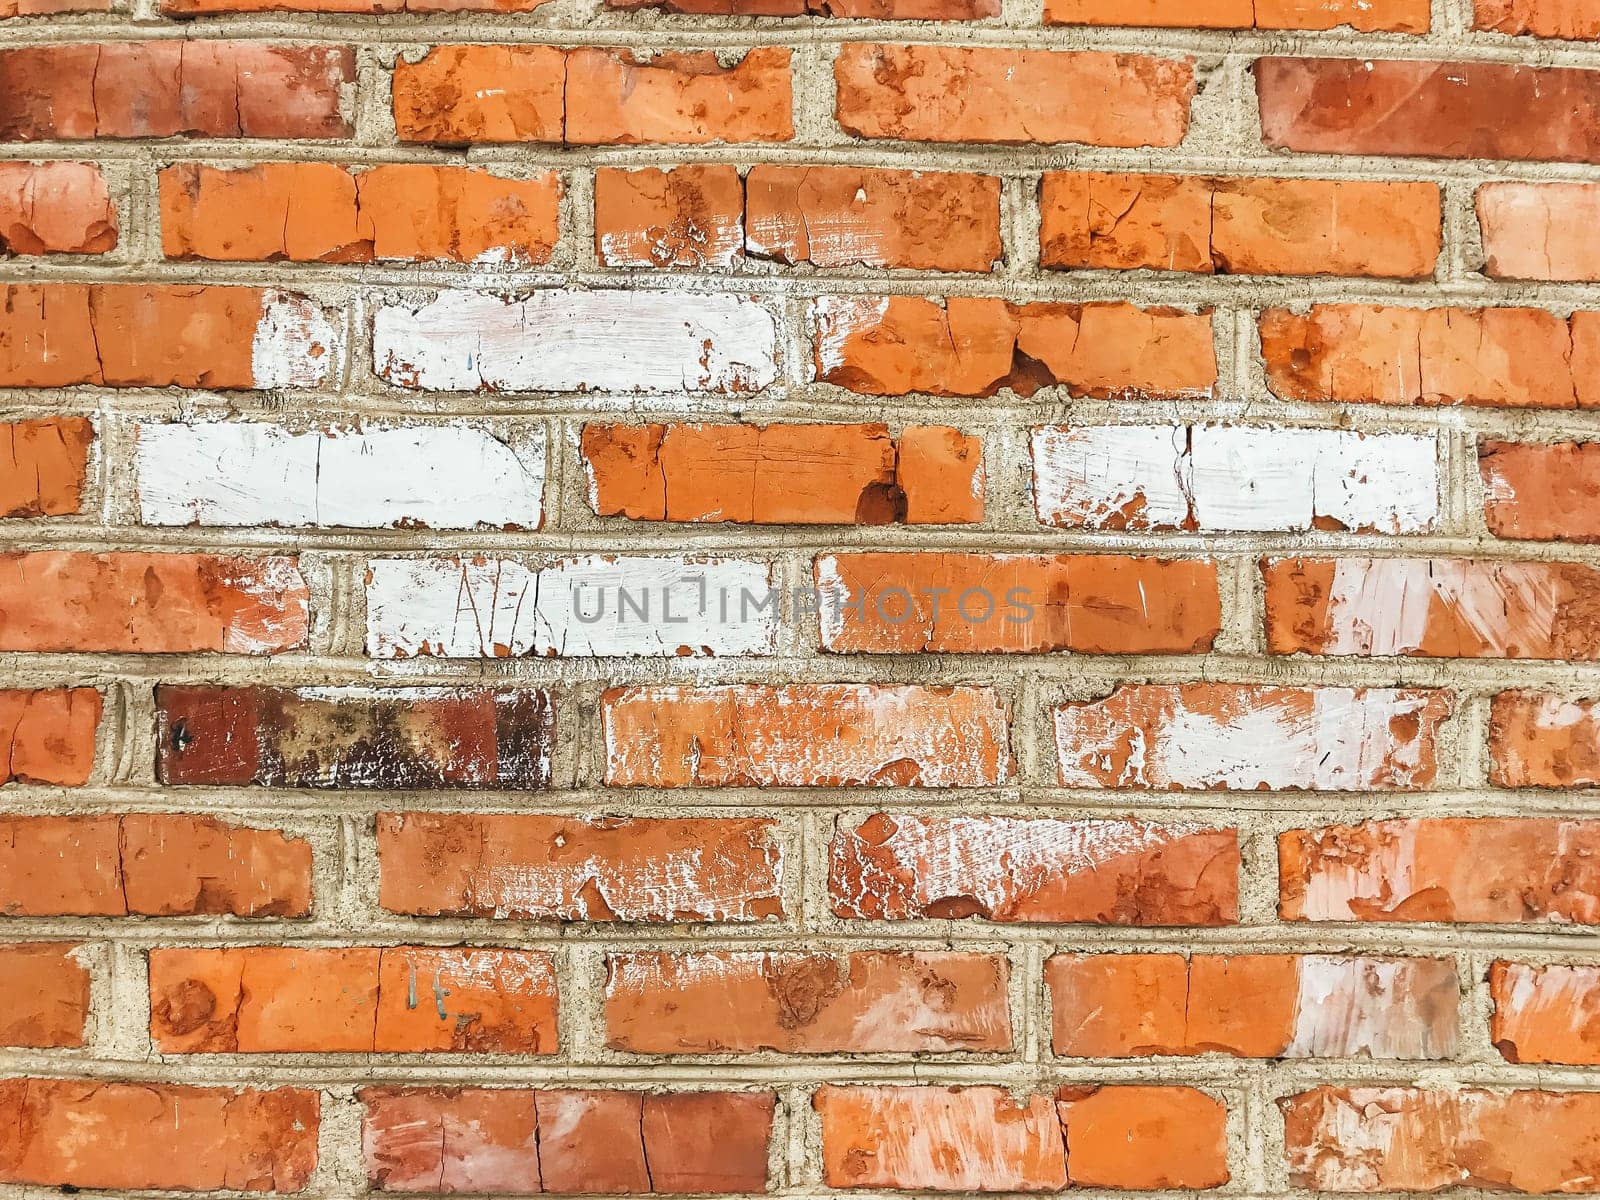 A brick wall with a white line painted on it. The white line is in the middle of the wall and is surrounded by red bricks. The wall appears to be old and worn, with some of the bricks missing